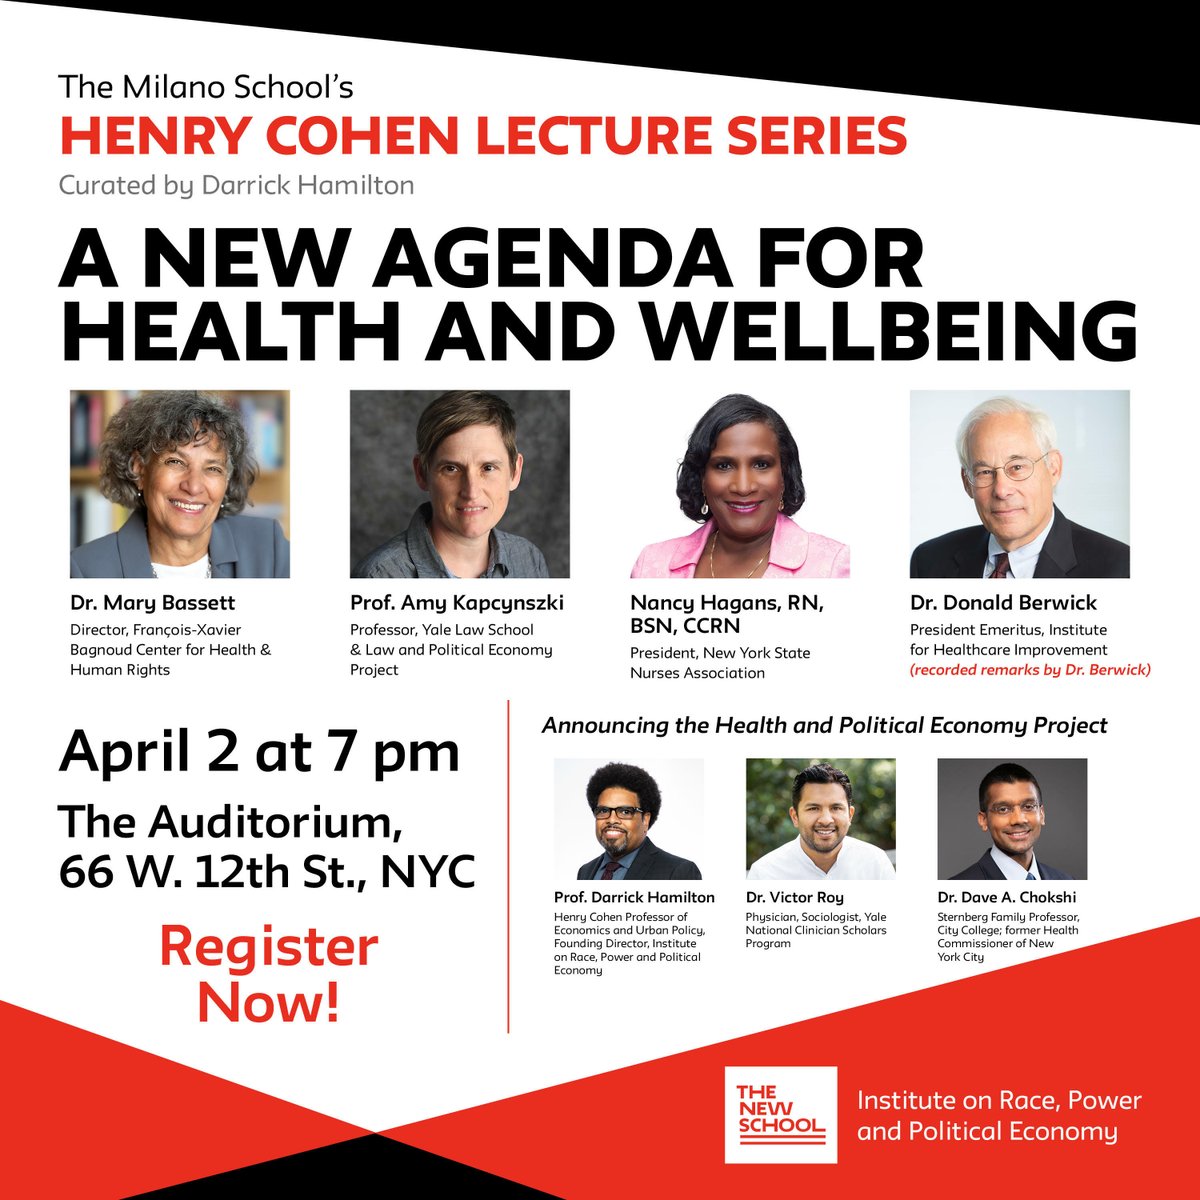 The U.S. is amid a decades-long health crisis.

Join us on Tuesday, April 2 at @TheNewSchool for a conversation with leading public health experts and educators to explore a new agenda for health and wellbeing.

#HenryCohenLectureSeries

Learn more & RSVP: bit.ly/newagendahealth